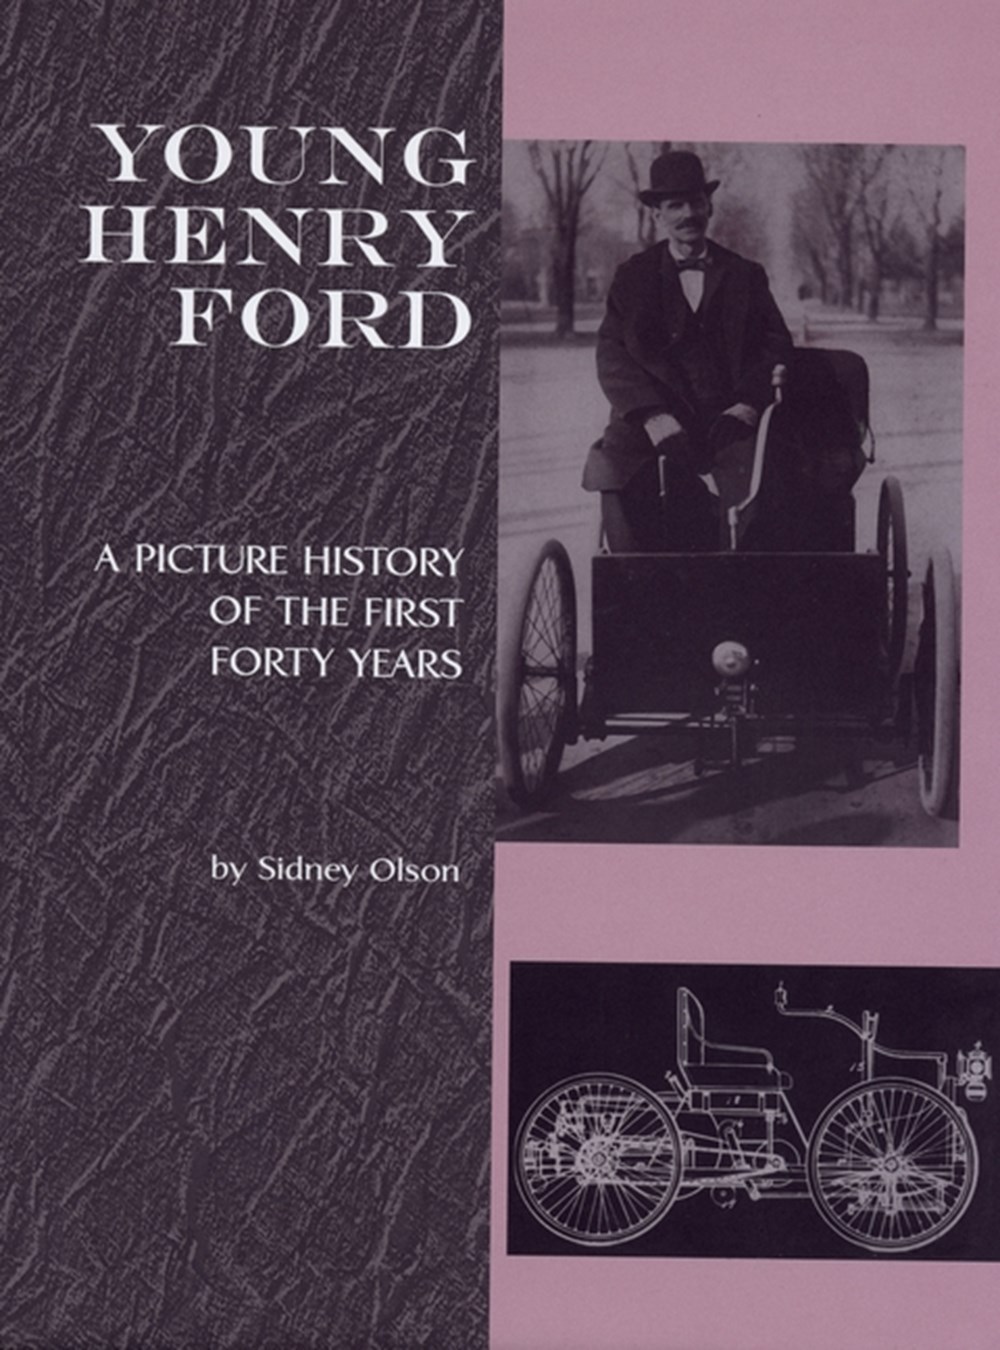 Young Henry Ford A Picture History of the First Forty Years